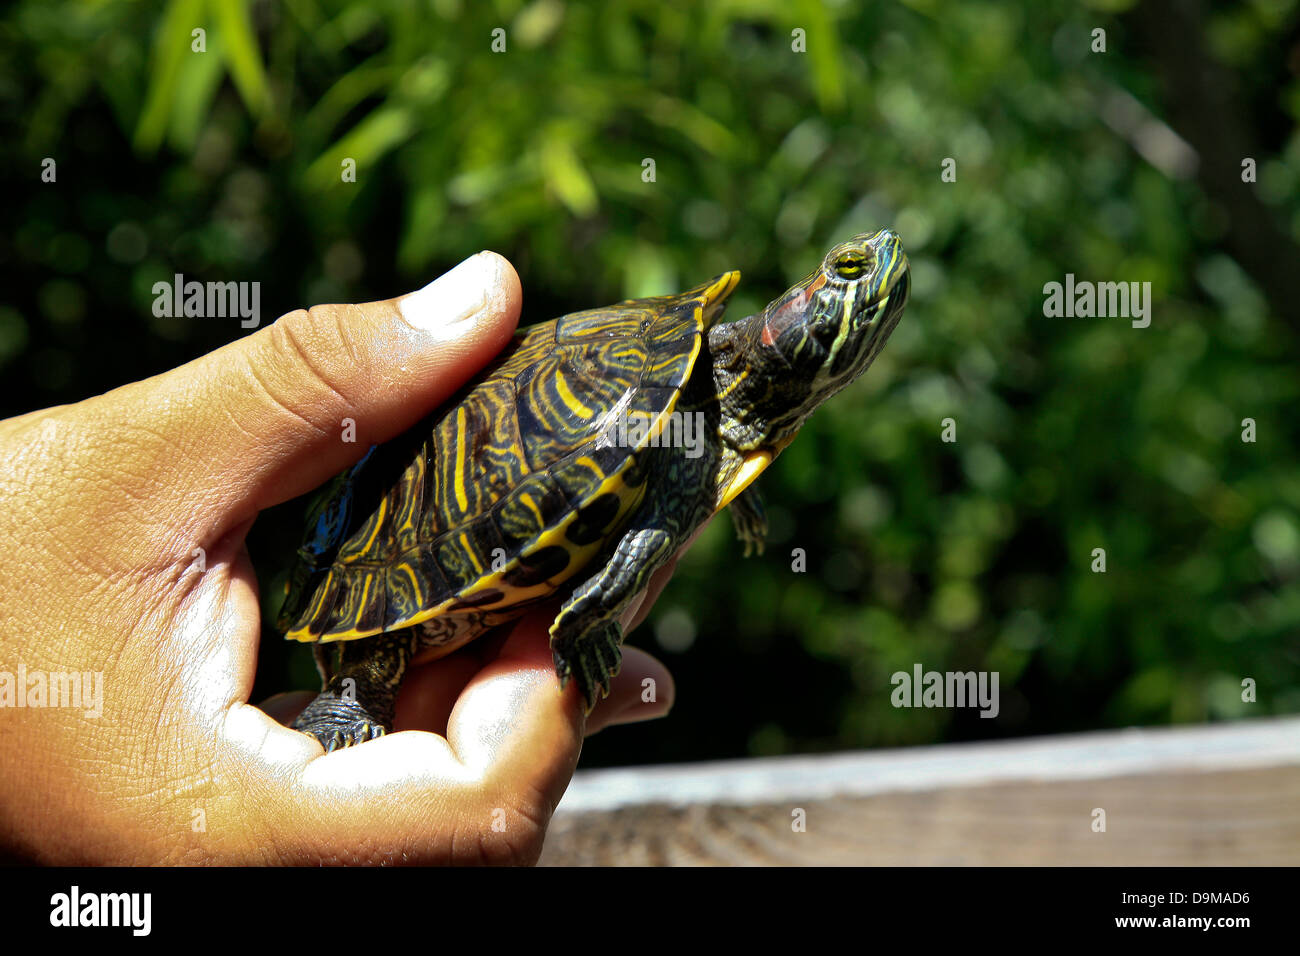 Turtle as seen in the Everglades National Park in Florida Stock Photo